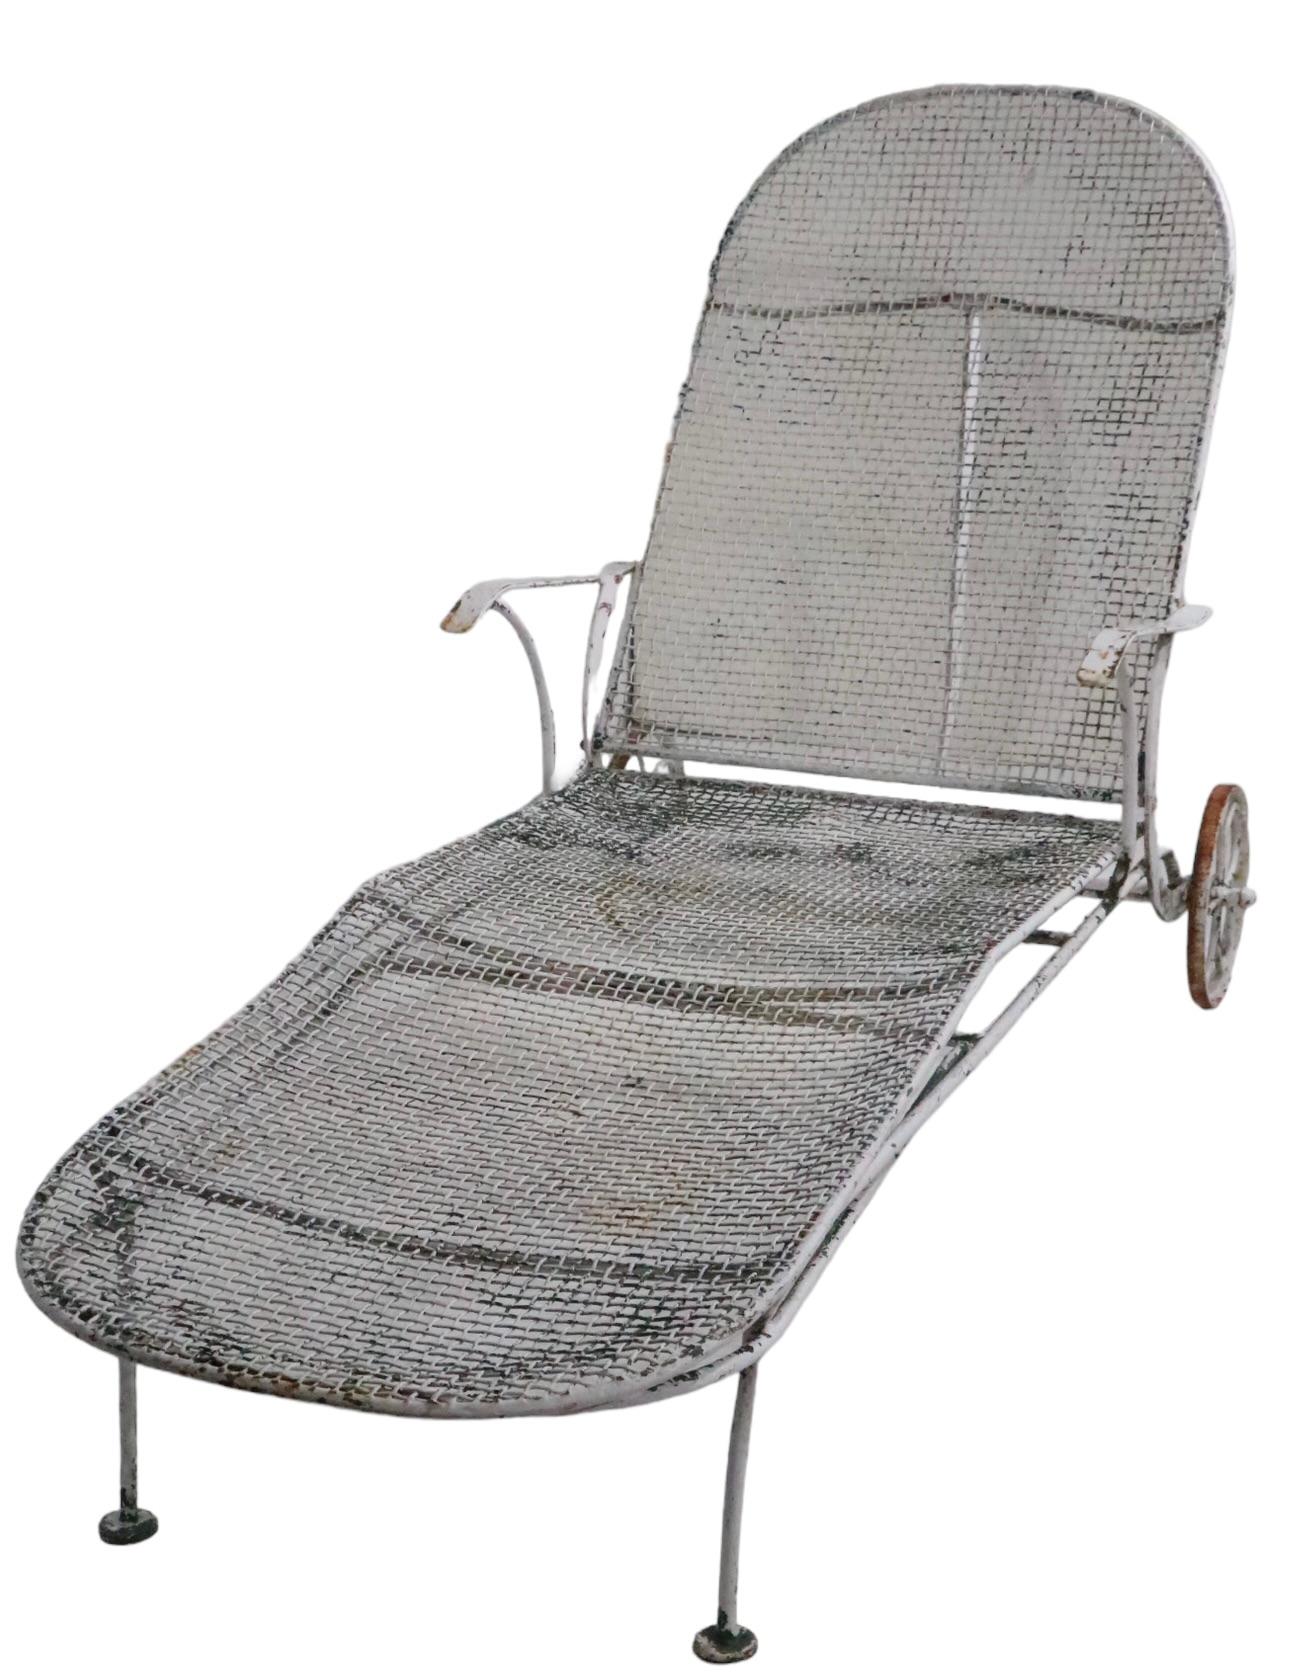  Wrought Iron Garden Poolside Patio Woodard Sculptura Chaise Lounge c. 1950's For Sale 5